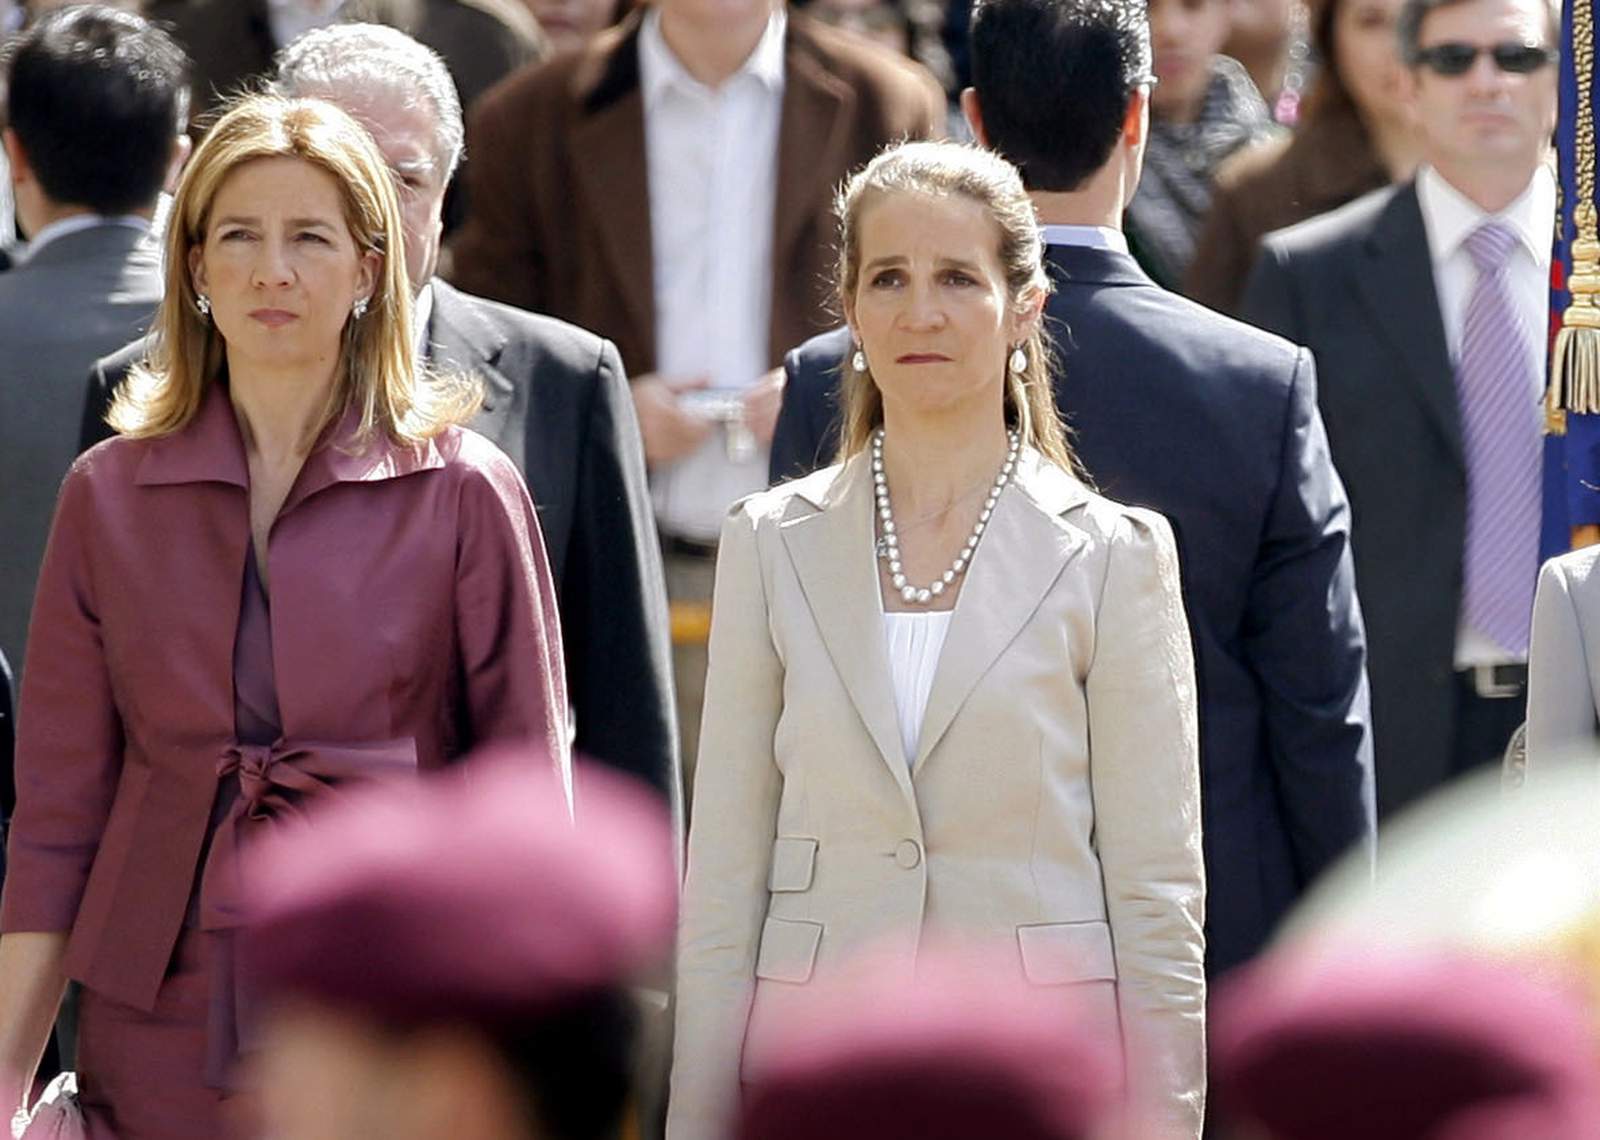 Spanish king's sisters vaccinated on trip to see dad in UAE